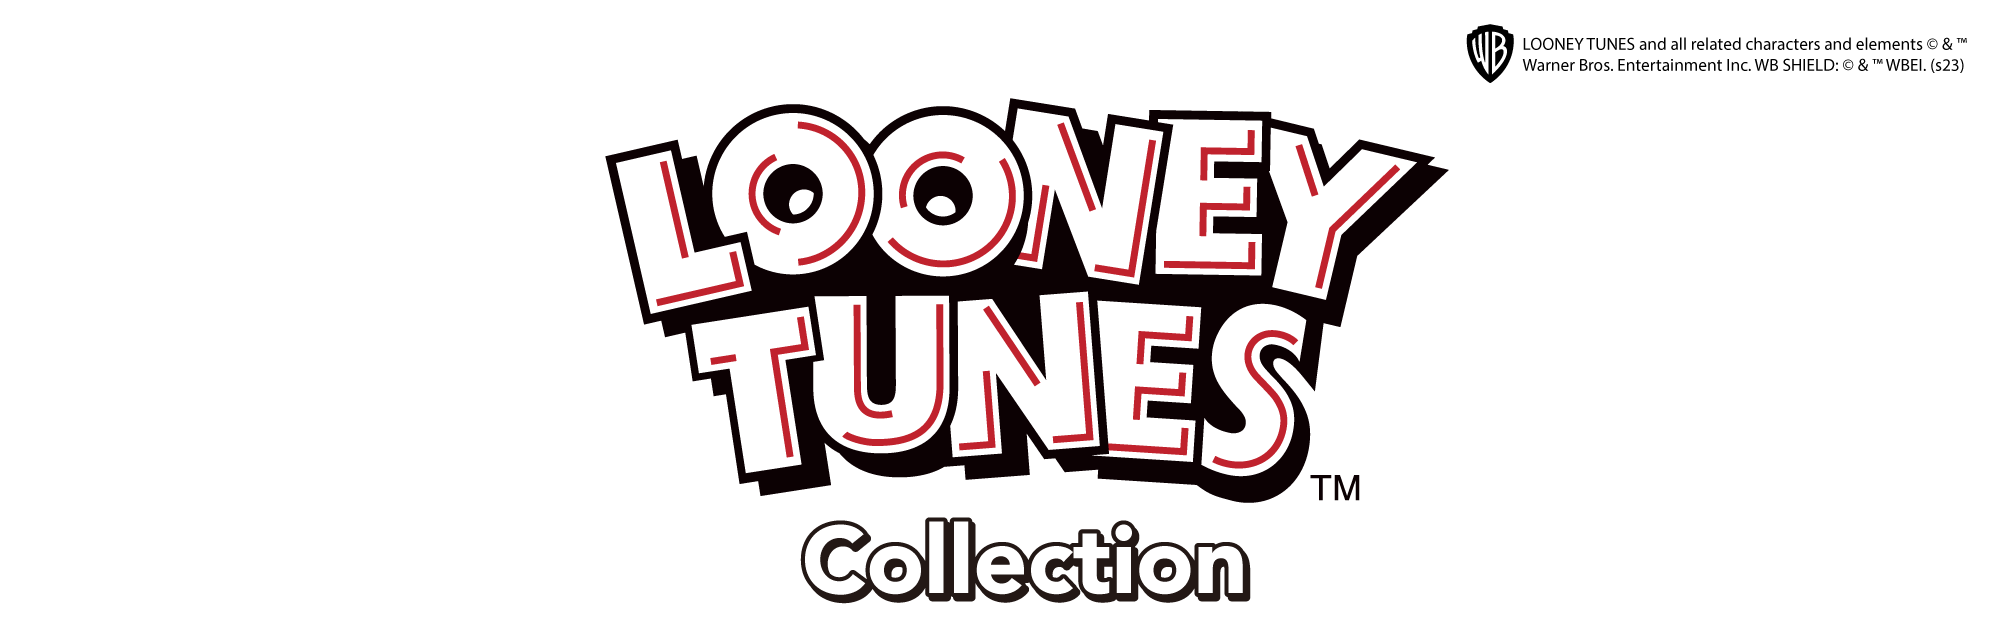 LOONEY TUNES Collection